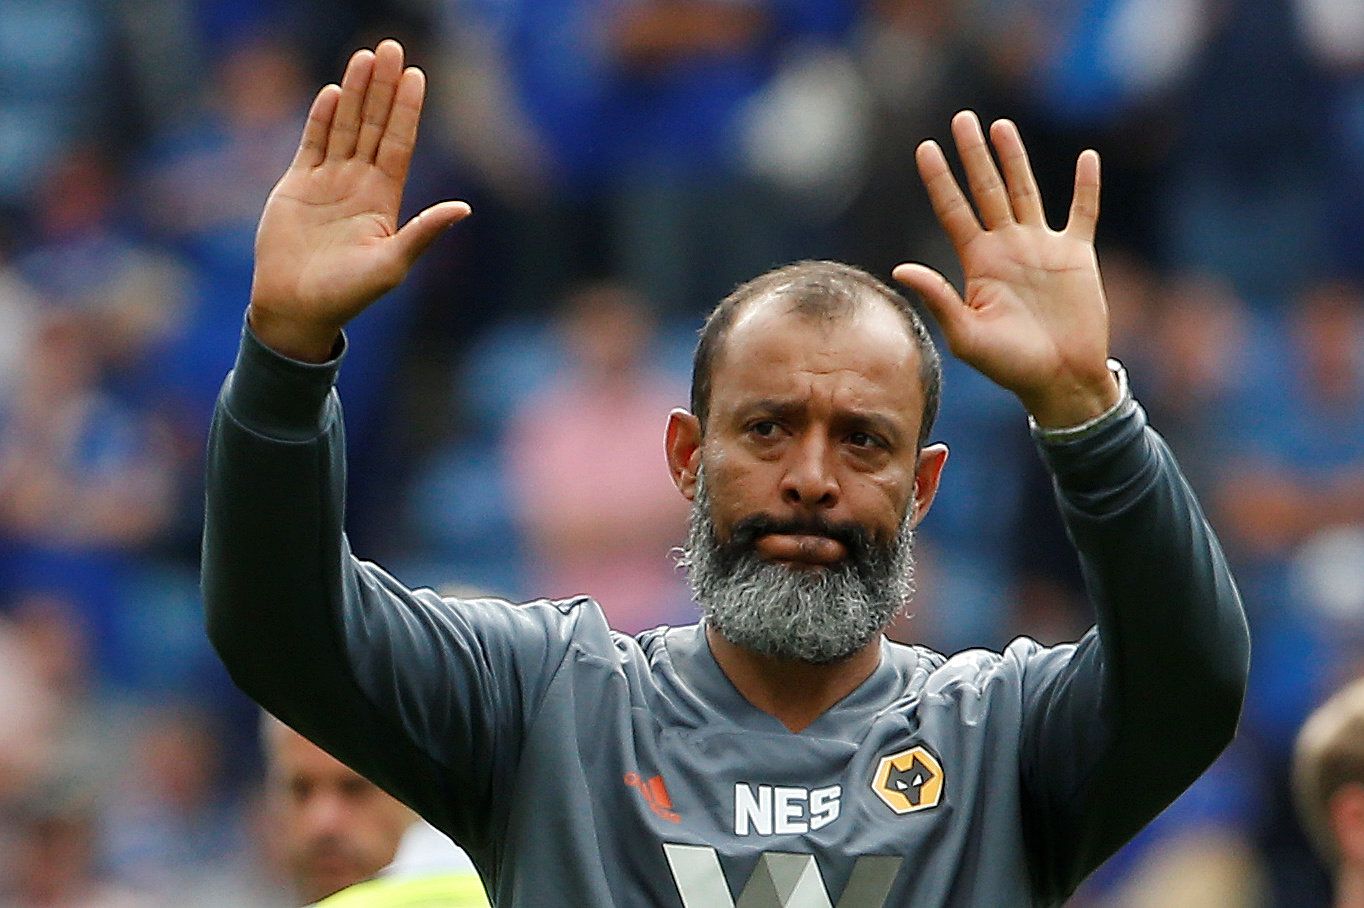 Soccer Football - Premier League - Leicester City v Wolverhampton Wanderers - King Power Stadium, Leicester, Britain - August 18, 2018   Wolverhampton Wanderers manager Nuno Espirito Santo reacts after the match      Action Images via Reuters/Craig Brough    EDITORIAL USE ONLY. No use with unauthorized audio, video, data, fixture lists, club/league logos or 